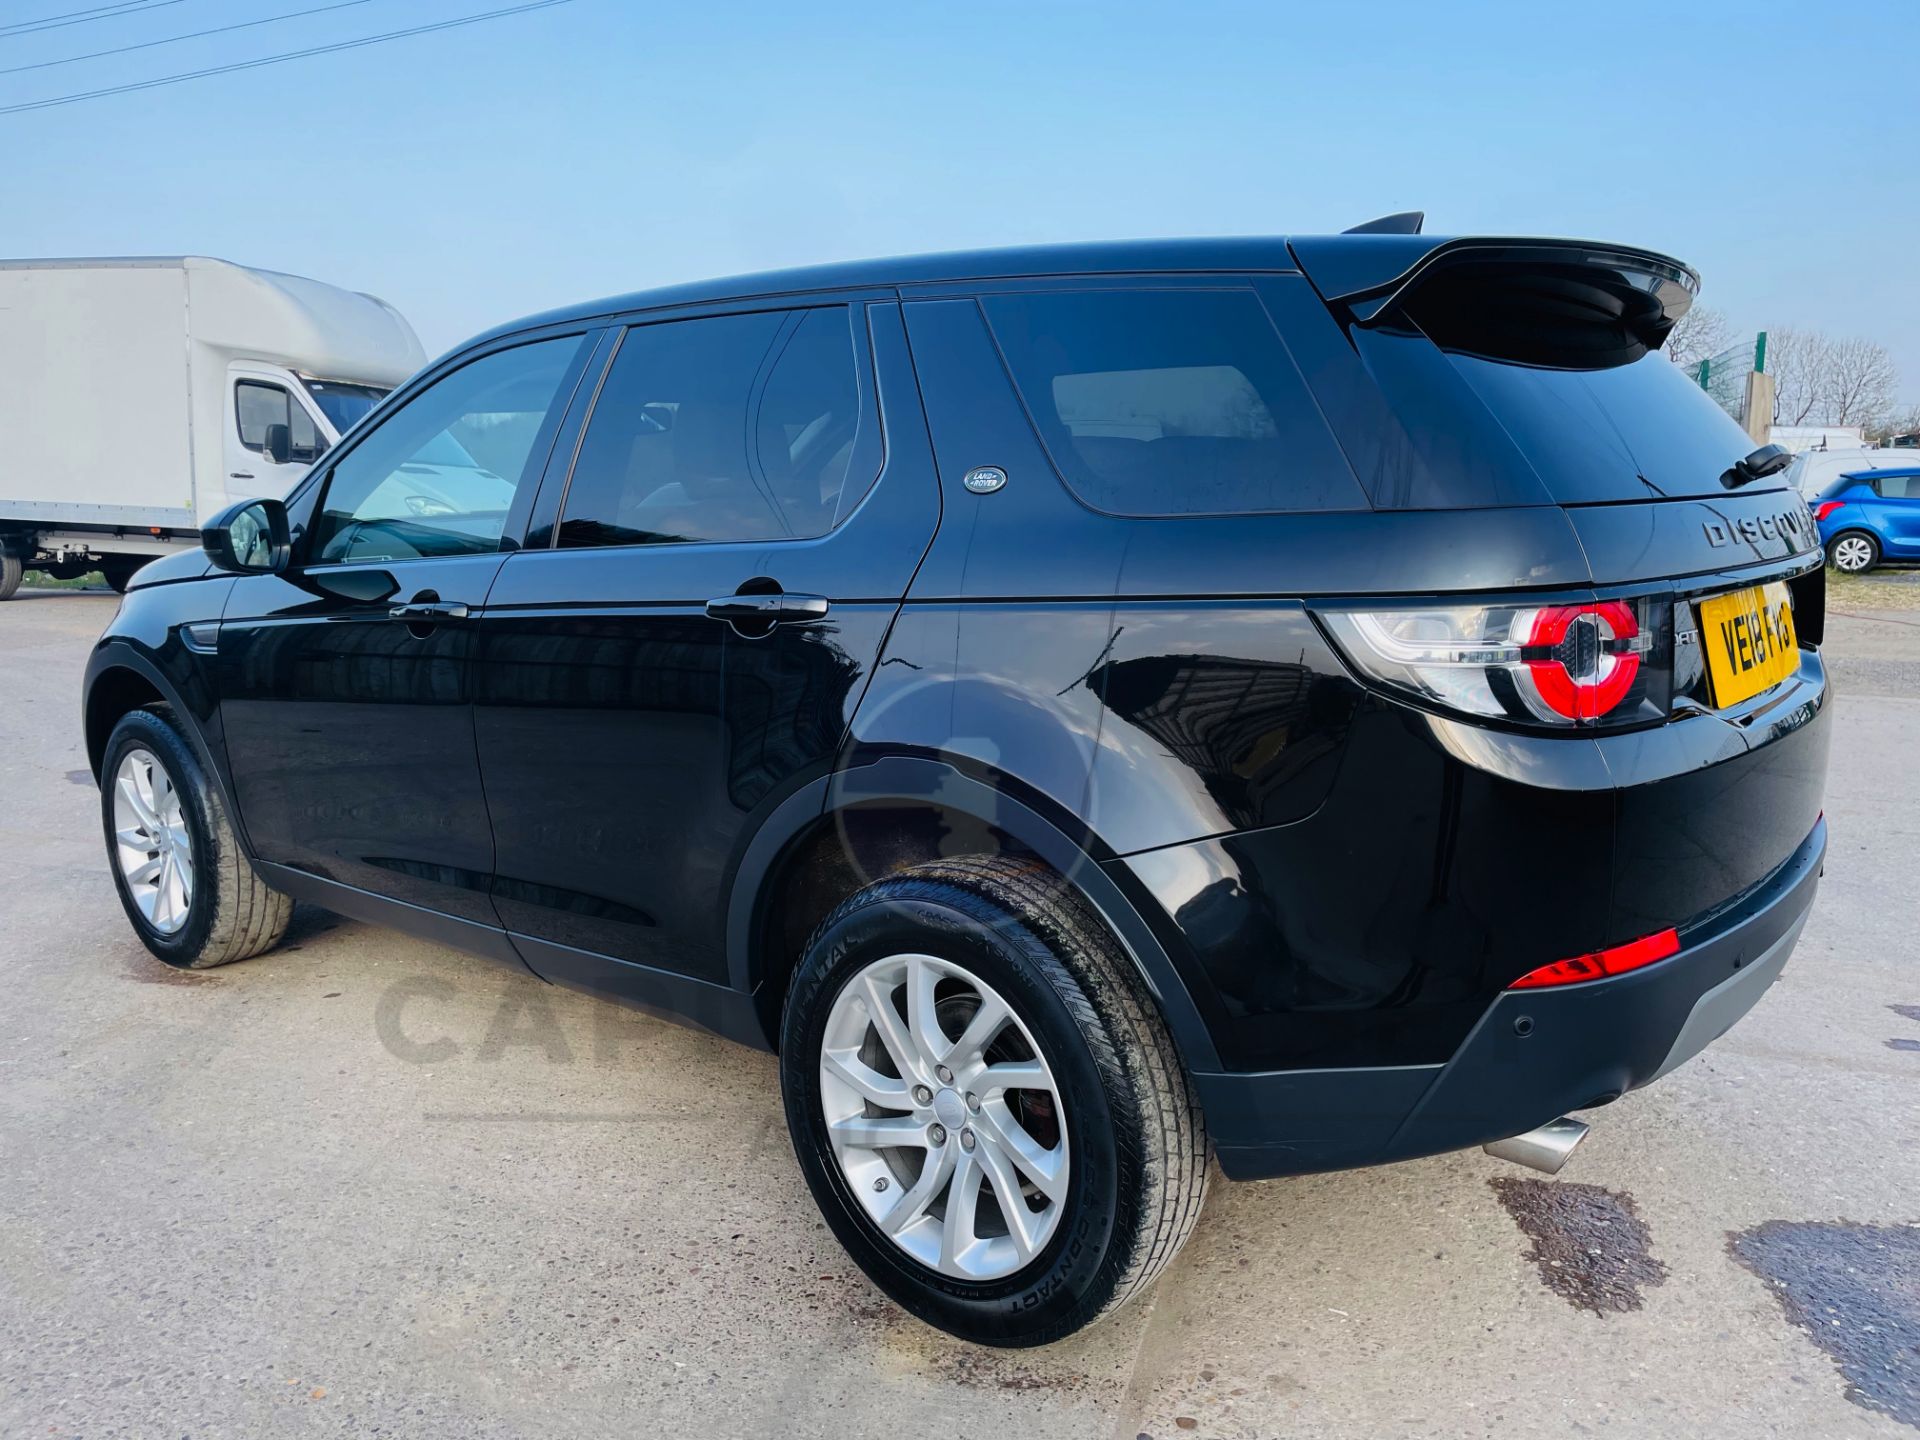 (On Sale) LAND ROVER DISCOVERY SPORT *SE TECH* 7 SEATER SUV (2018 - EURO 6) TD4 - AUTO *LOW MILEAGE* - Image 9 of 35